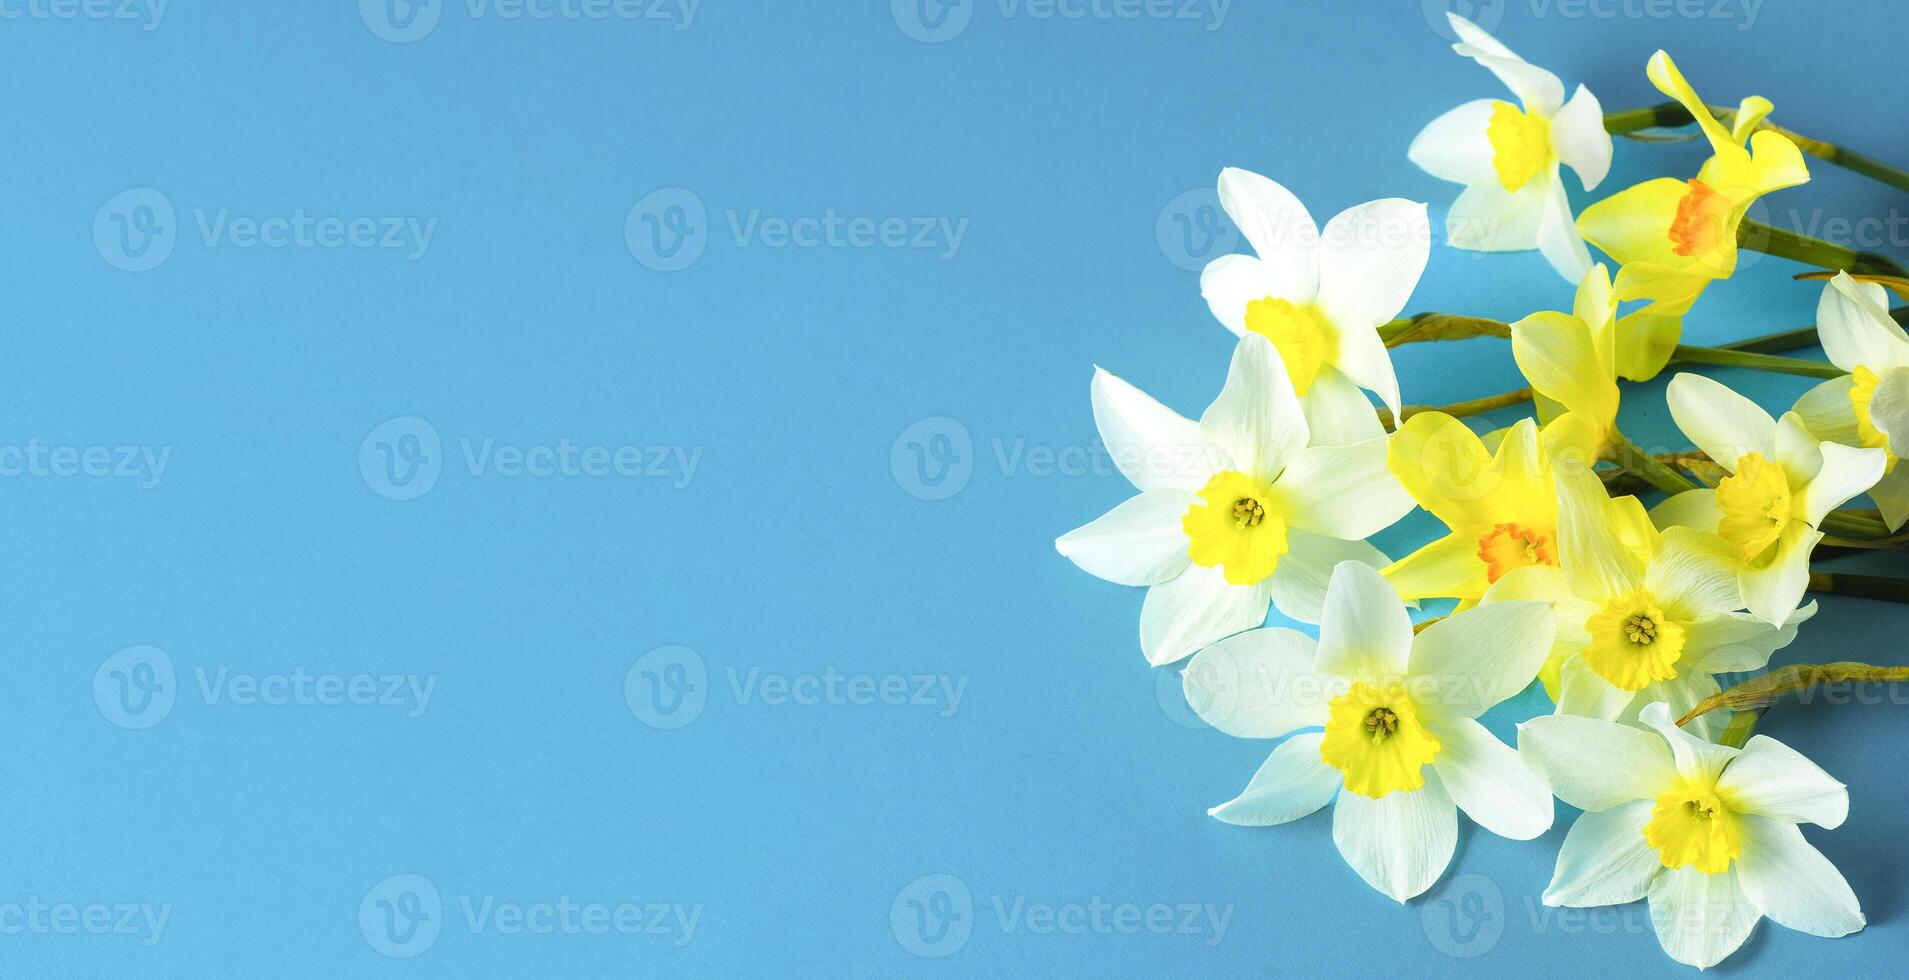 White and yellow daffodils on a blue background. Flower with orange center. Spring flowers. A simple daffodil bud. Narcissus bouquet. photo